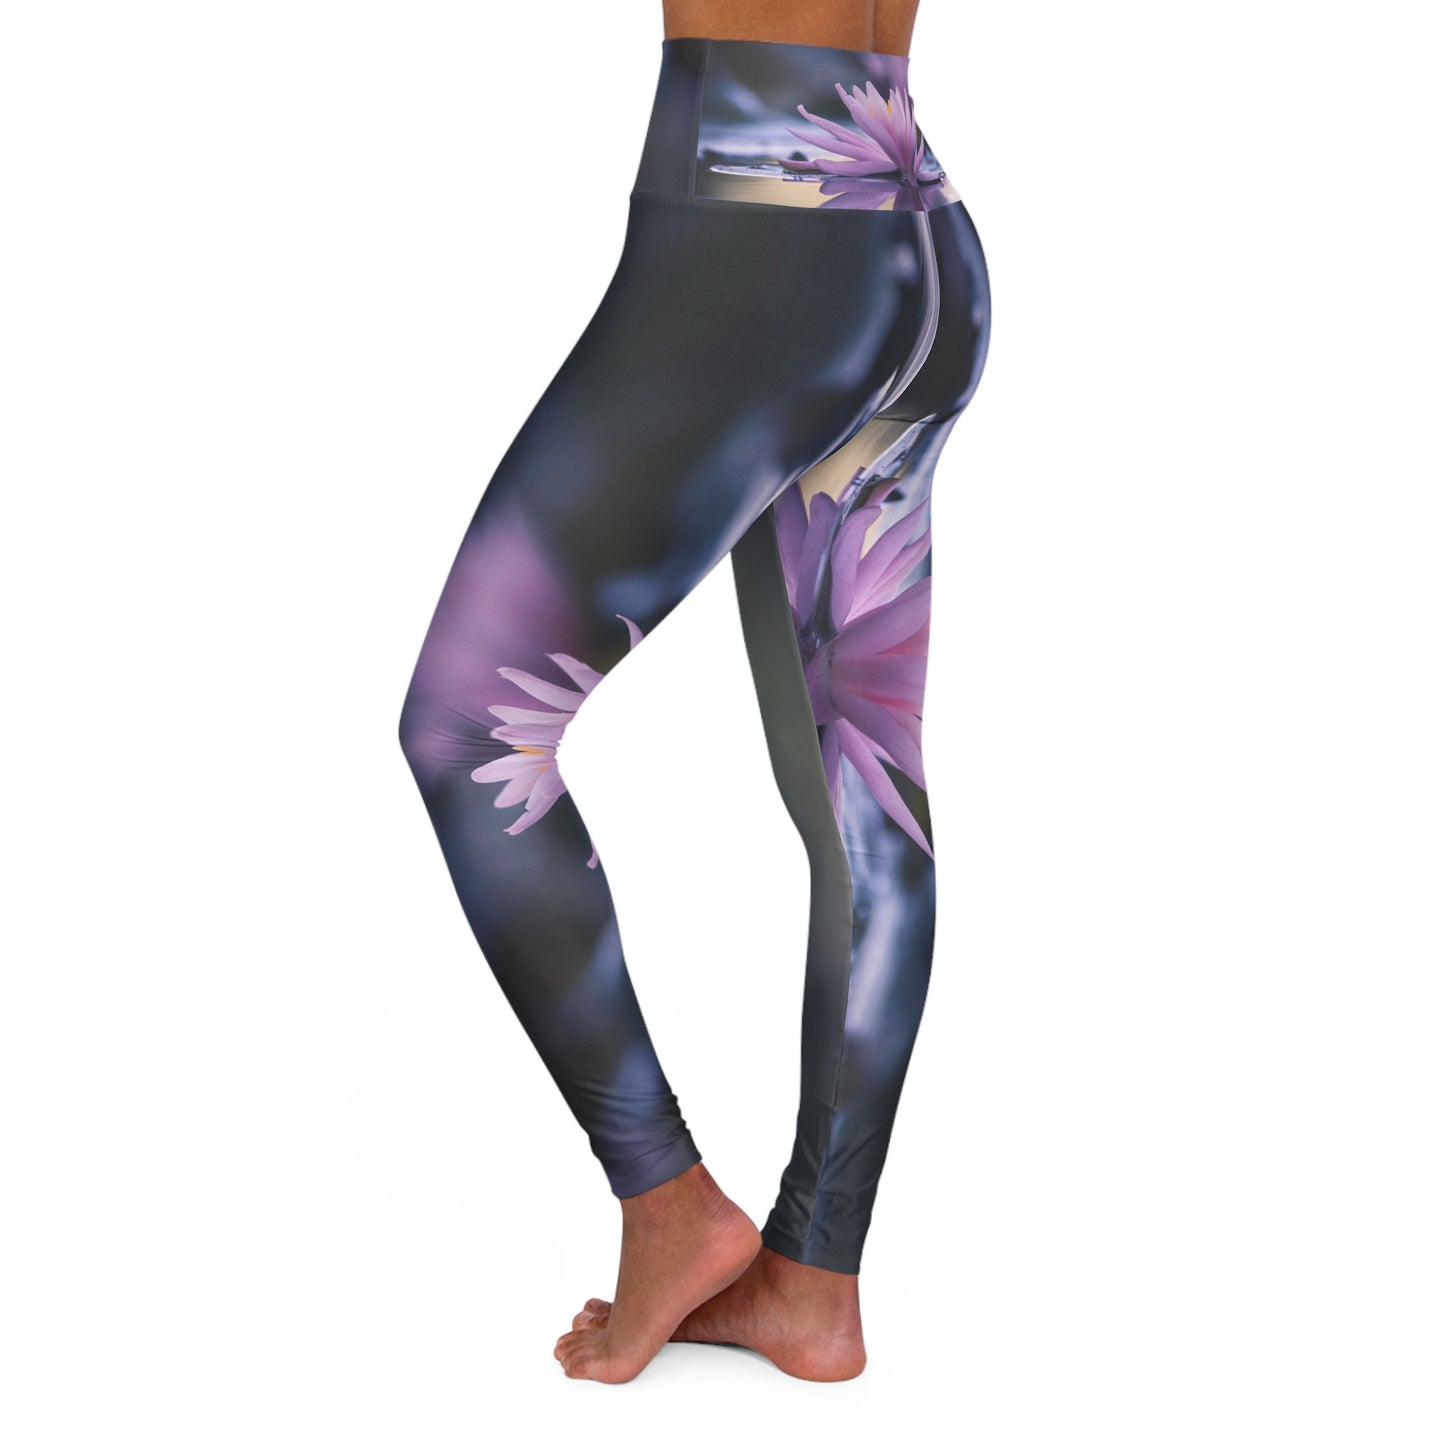 Purple Lotus Flower Artistic Abstract Skinny Fit High Waisted Yoga Leggings, Expertly Crafted in the USA